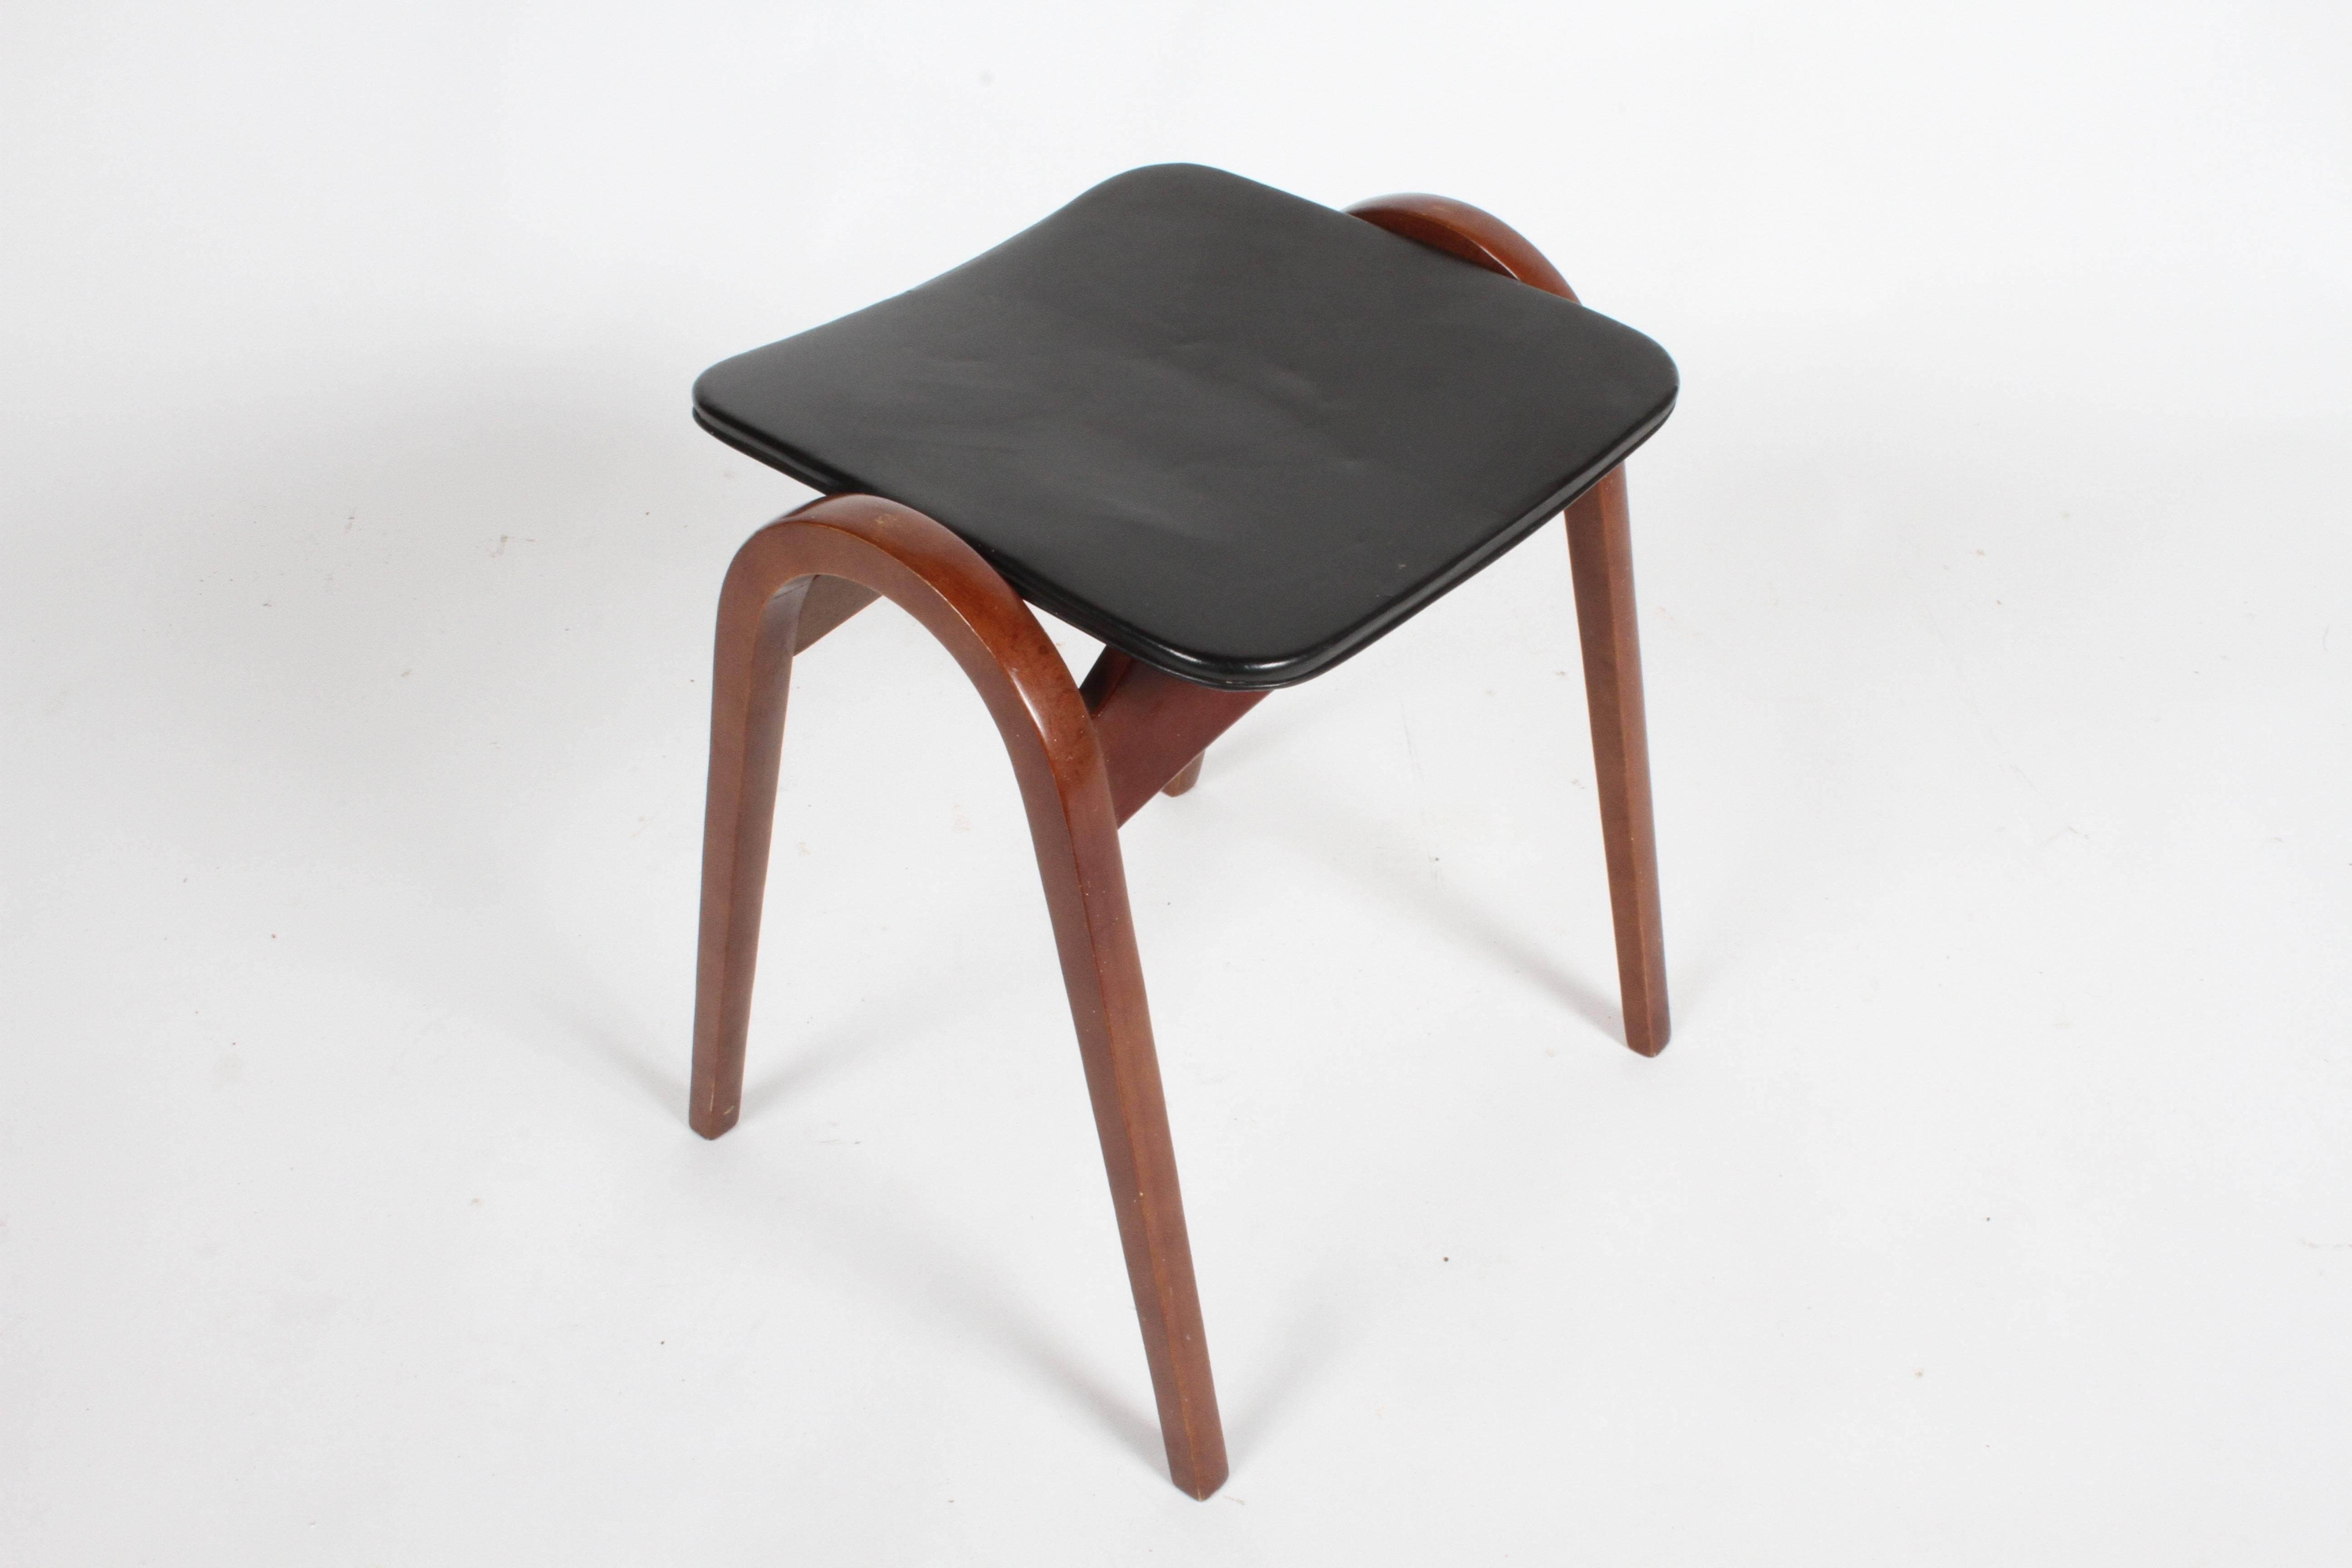 Single bentwood stool by Isamu Kenmochi (1912-1971) for Akita Mokko. Original condition, minor scuffs. Label, circa 1950s

Kenmochi was one of the most significant designers in midcentury Japan. He was a founding member of the Japan Industrial